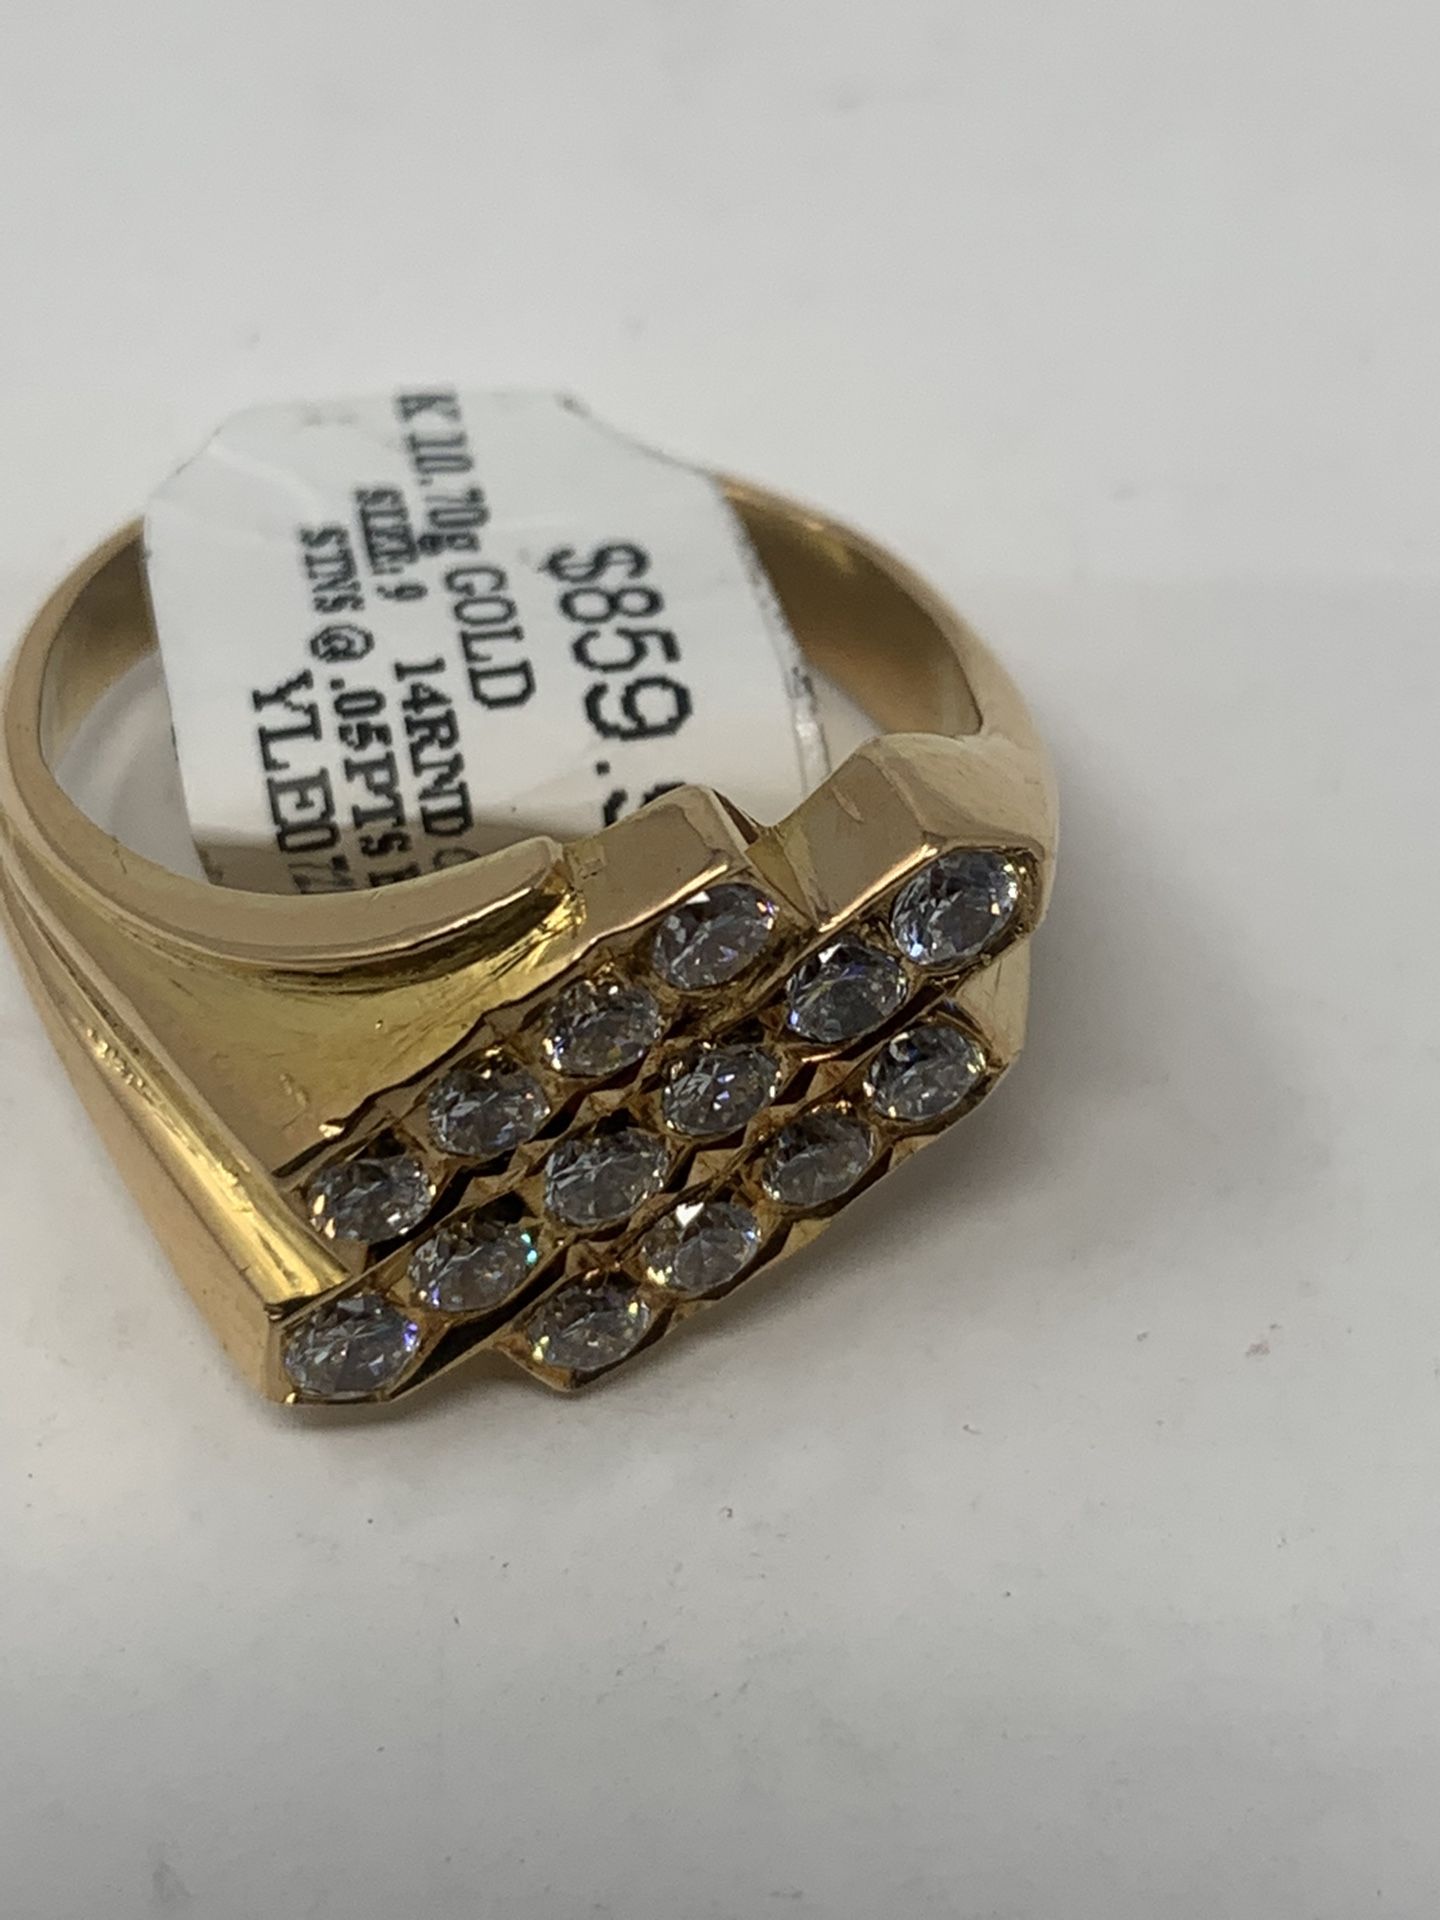 22 karat yellow gold ring with 10.70 gram of gold  with Cz store. in excellent condition  size 9. Check for availability Open From 9 am to 7 pm   Mon 